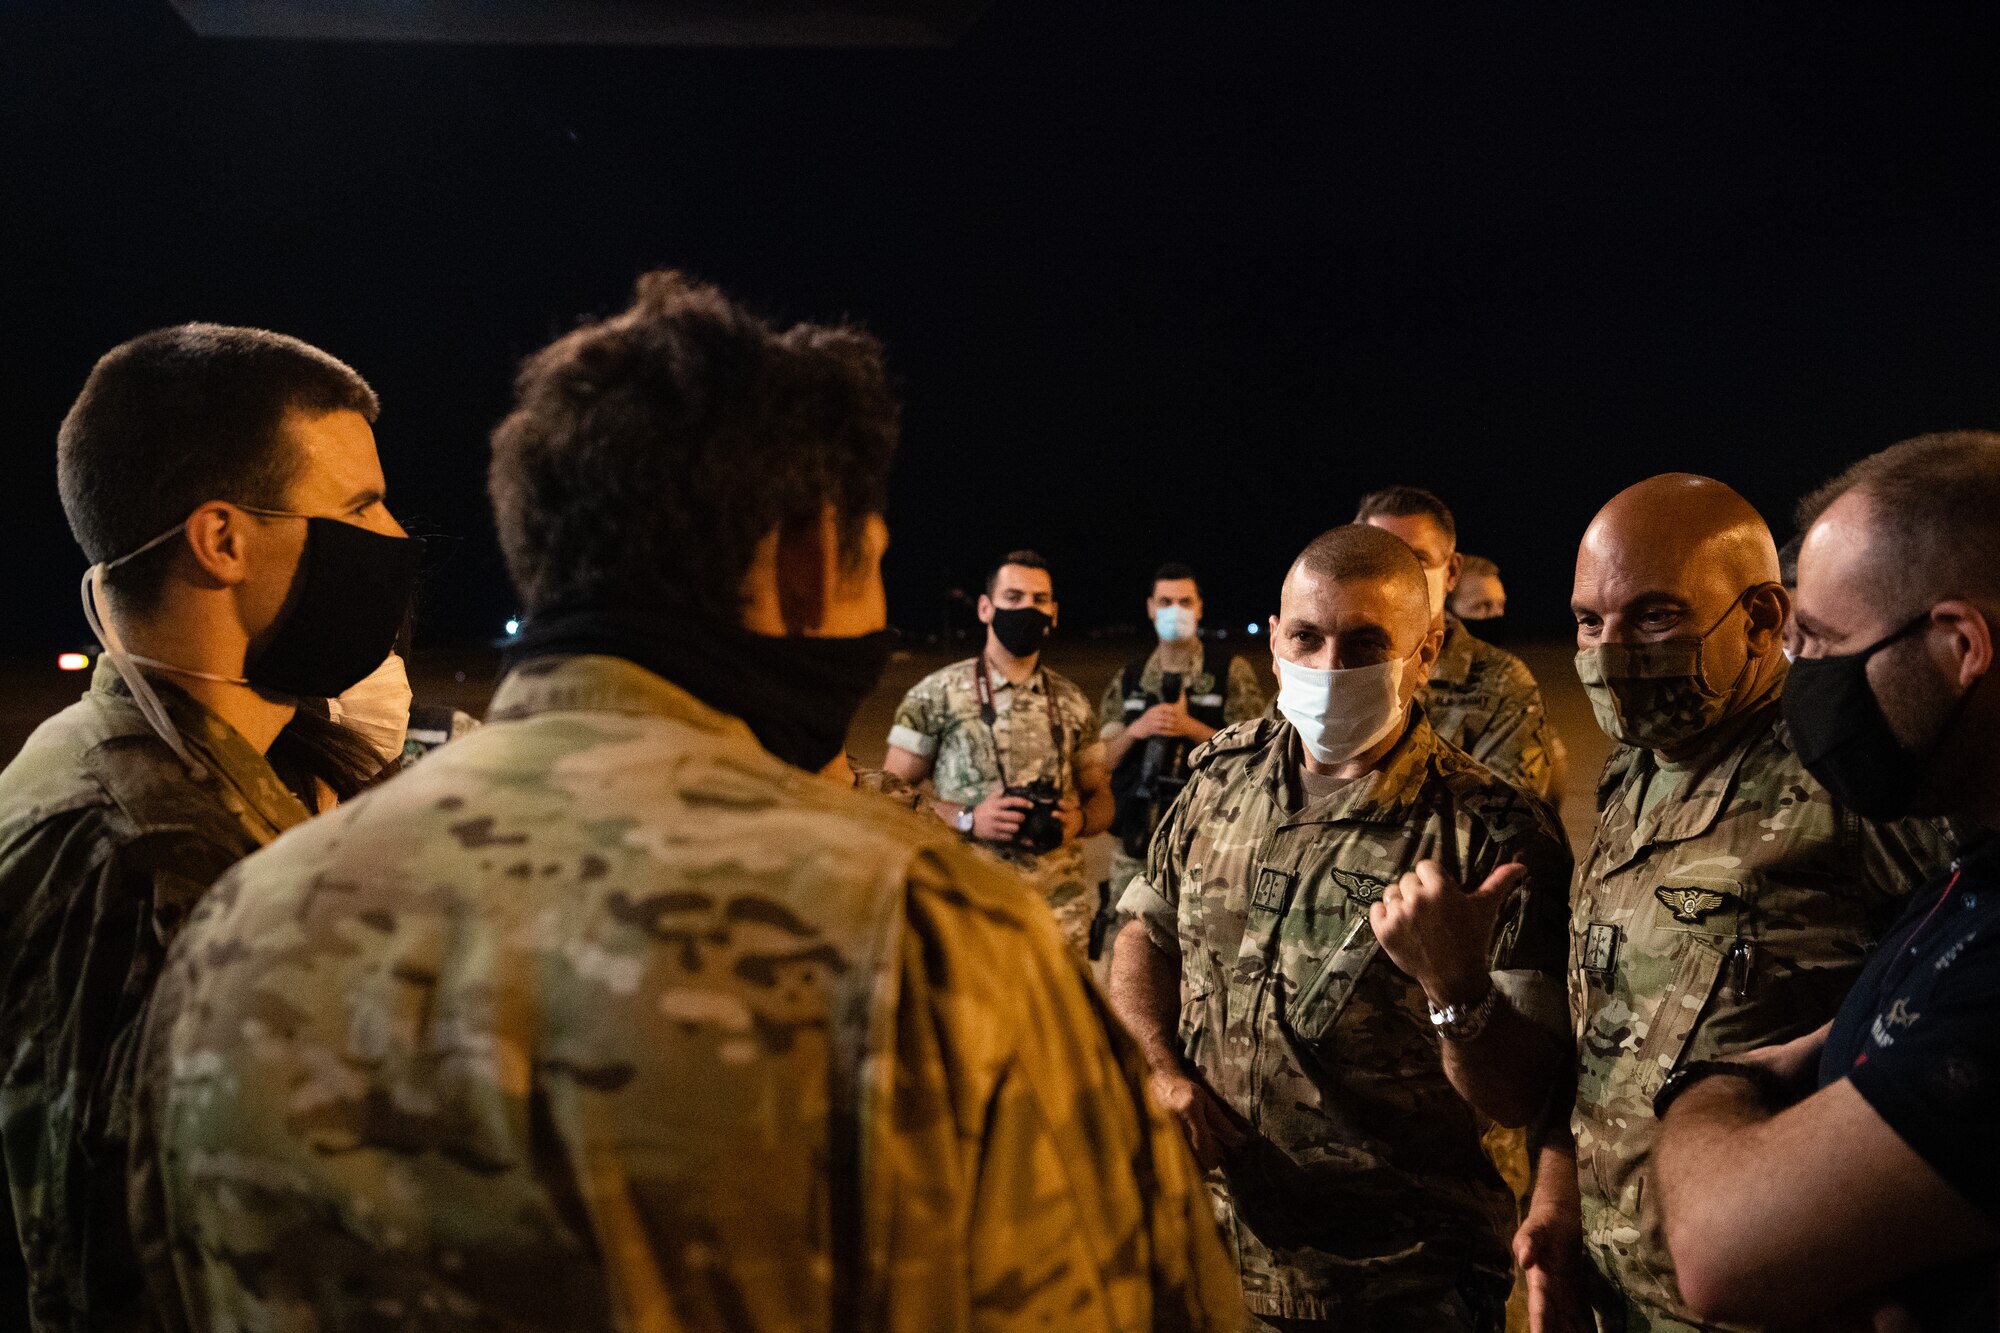 U.S. Central Command is coordinating with the Lebanese Armed Forces and U.S. Embassy-Beirut to transport critical supplies as quickly as possible to support the needs of the Lebanese people.